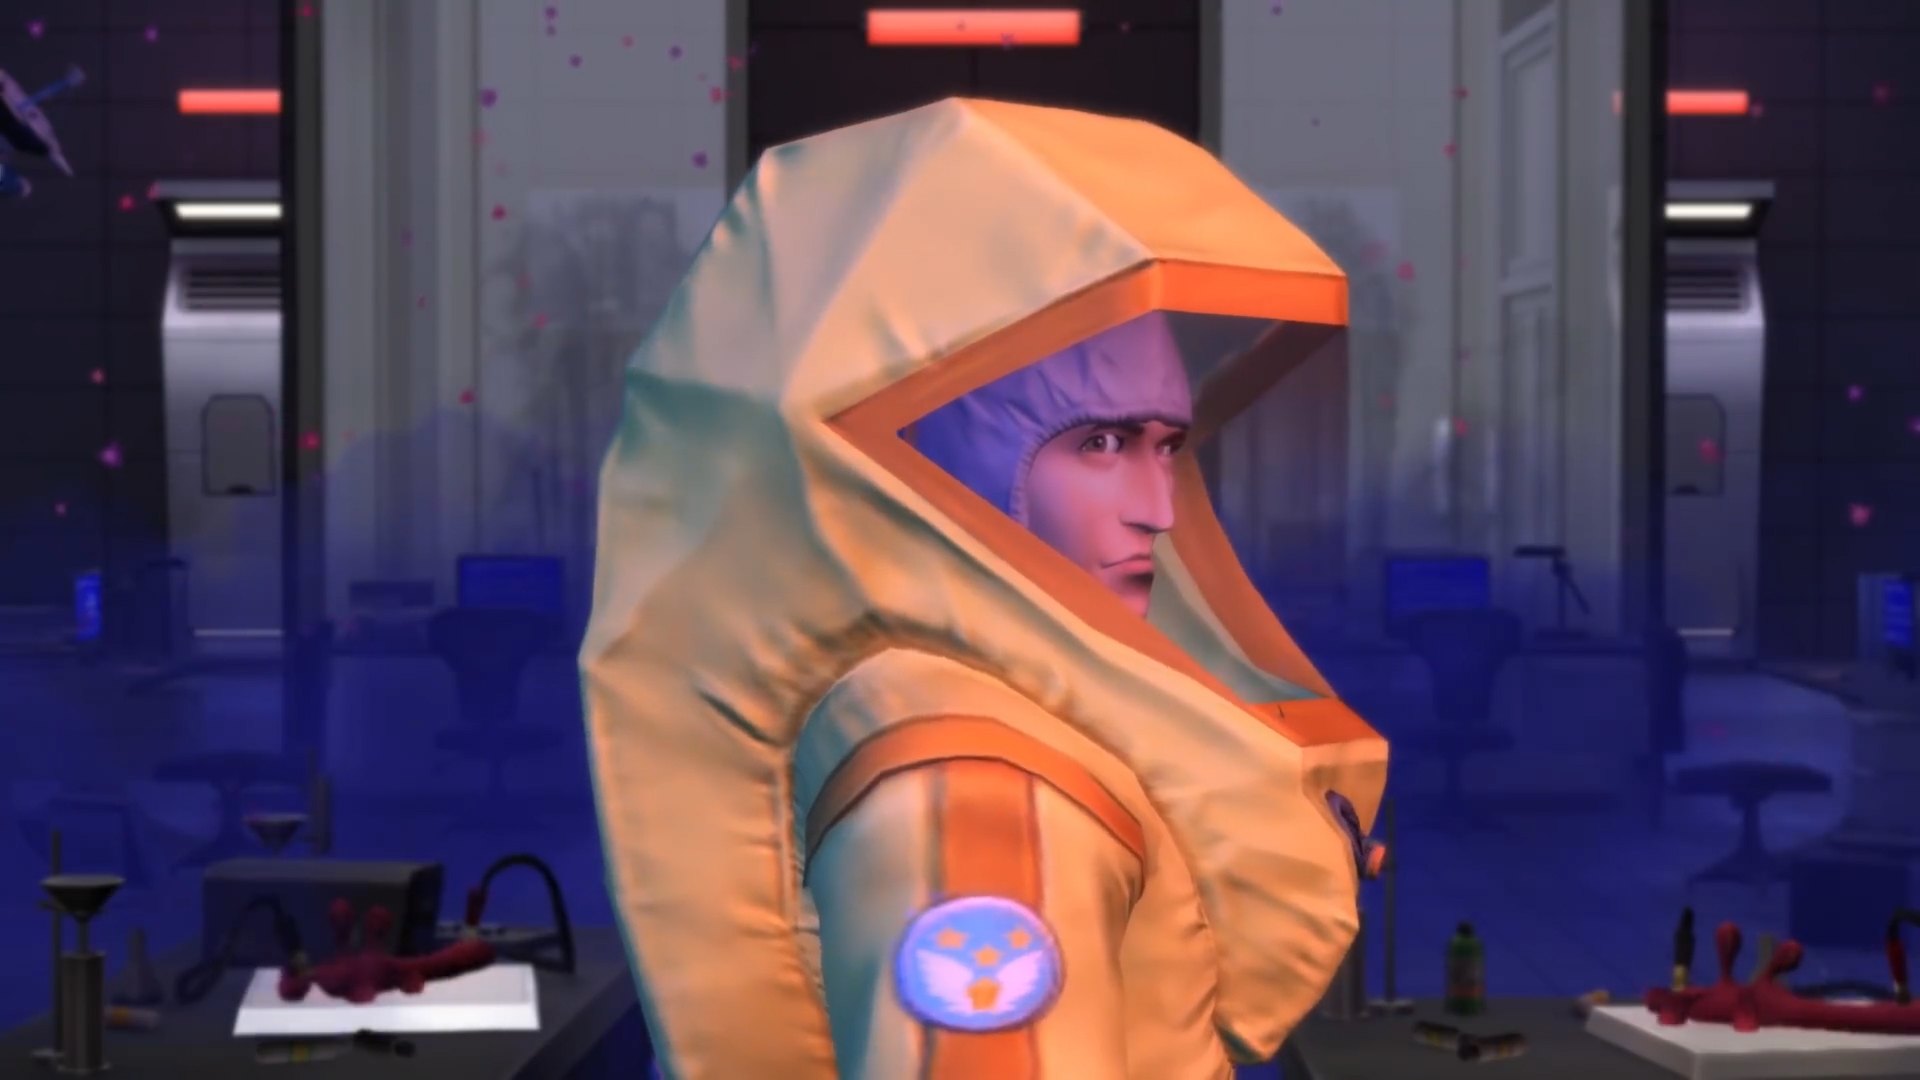 The Sims 4 Strangerville - Sims can dress up in a hazmat suit.